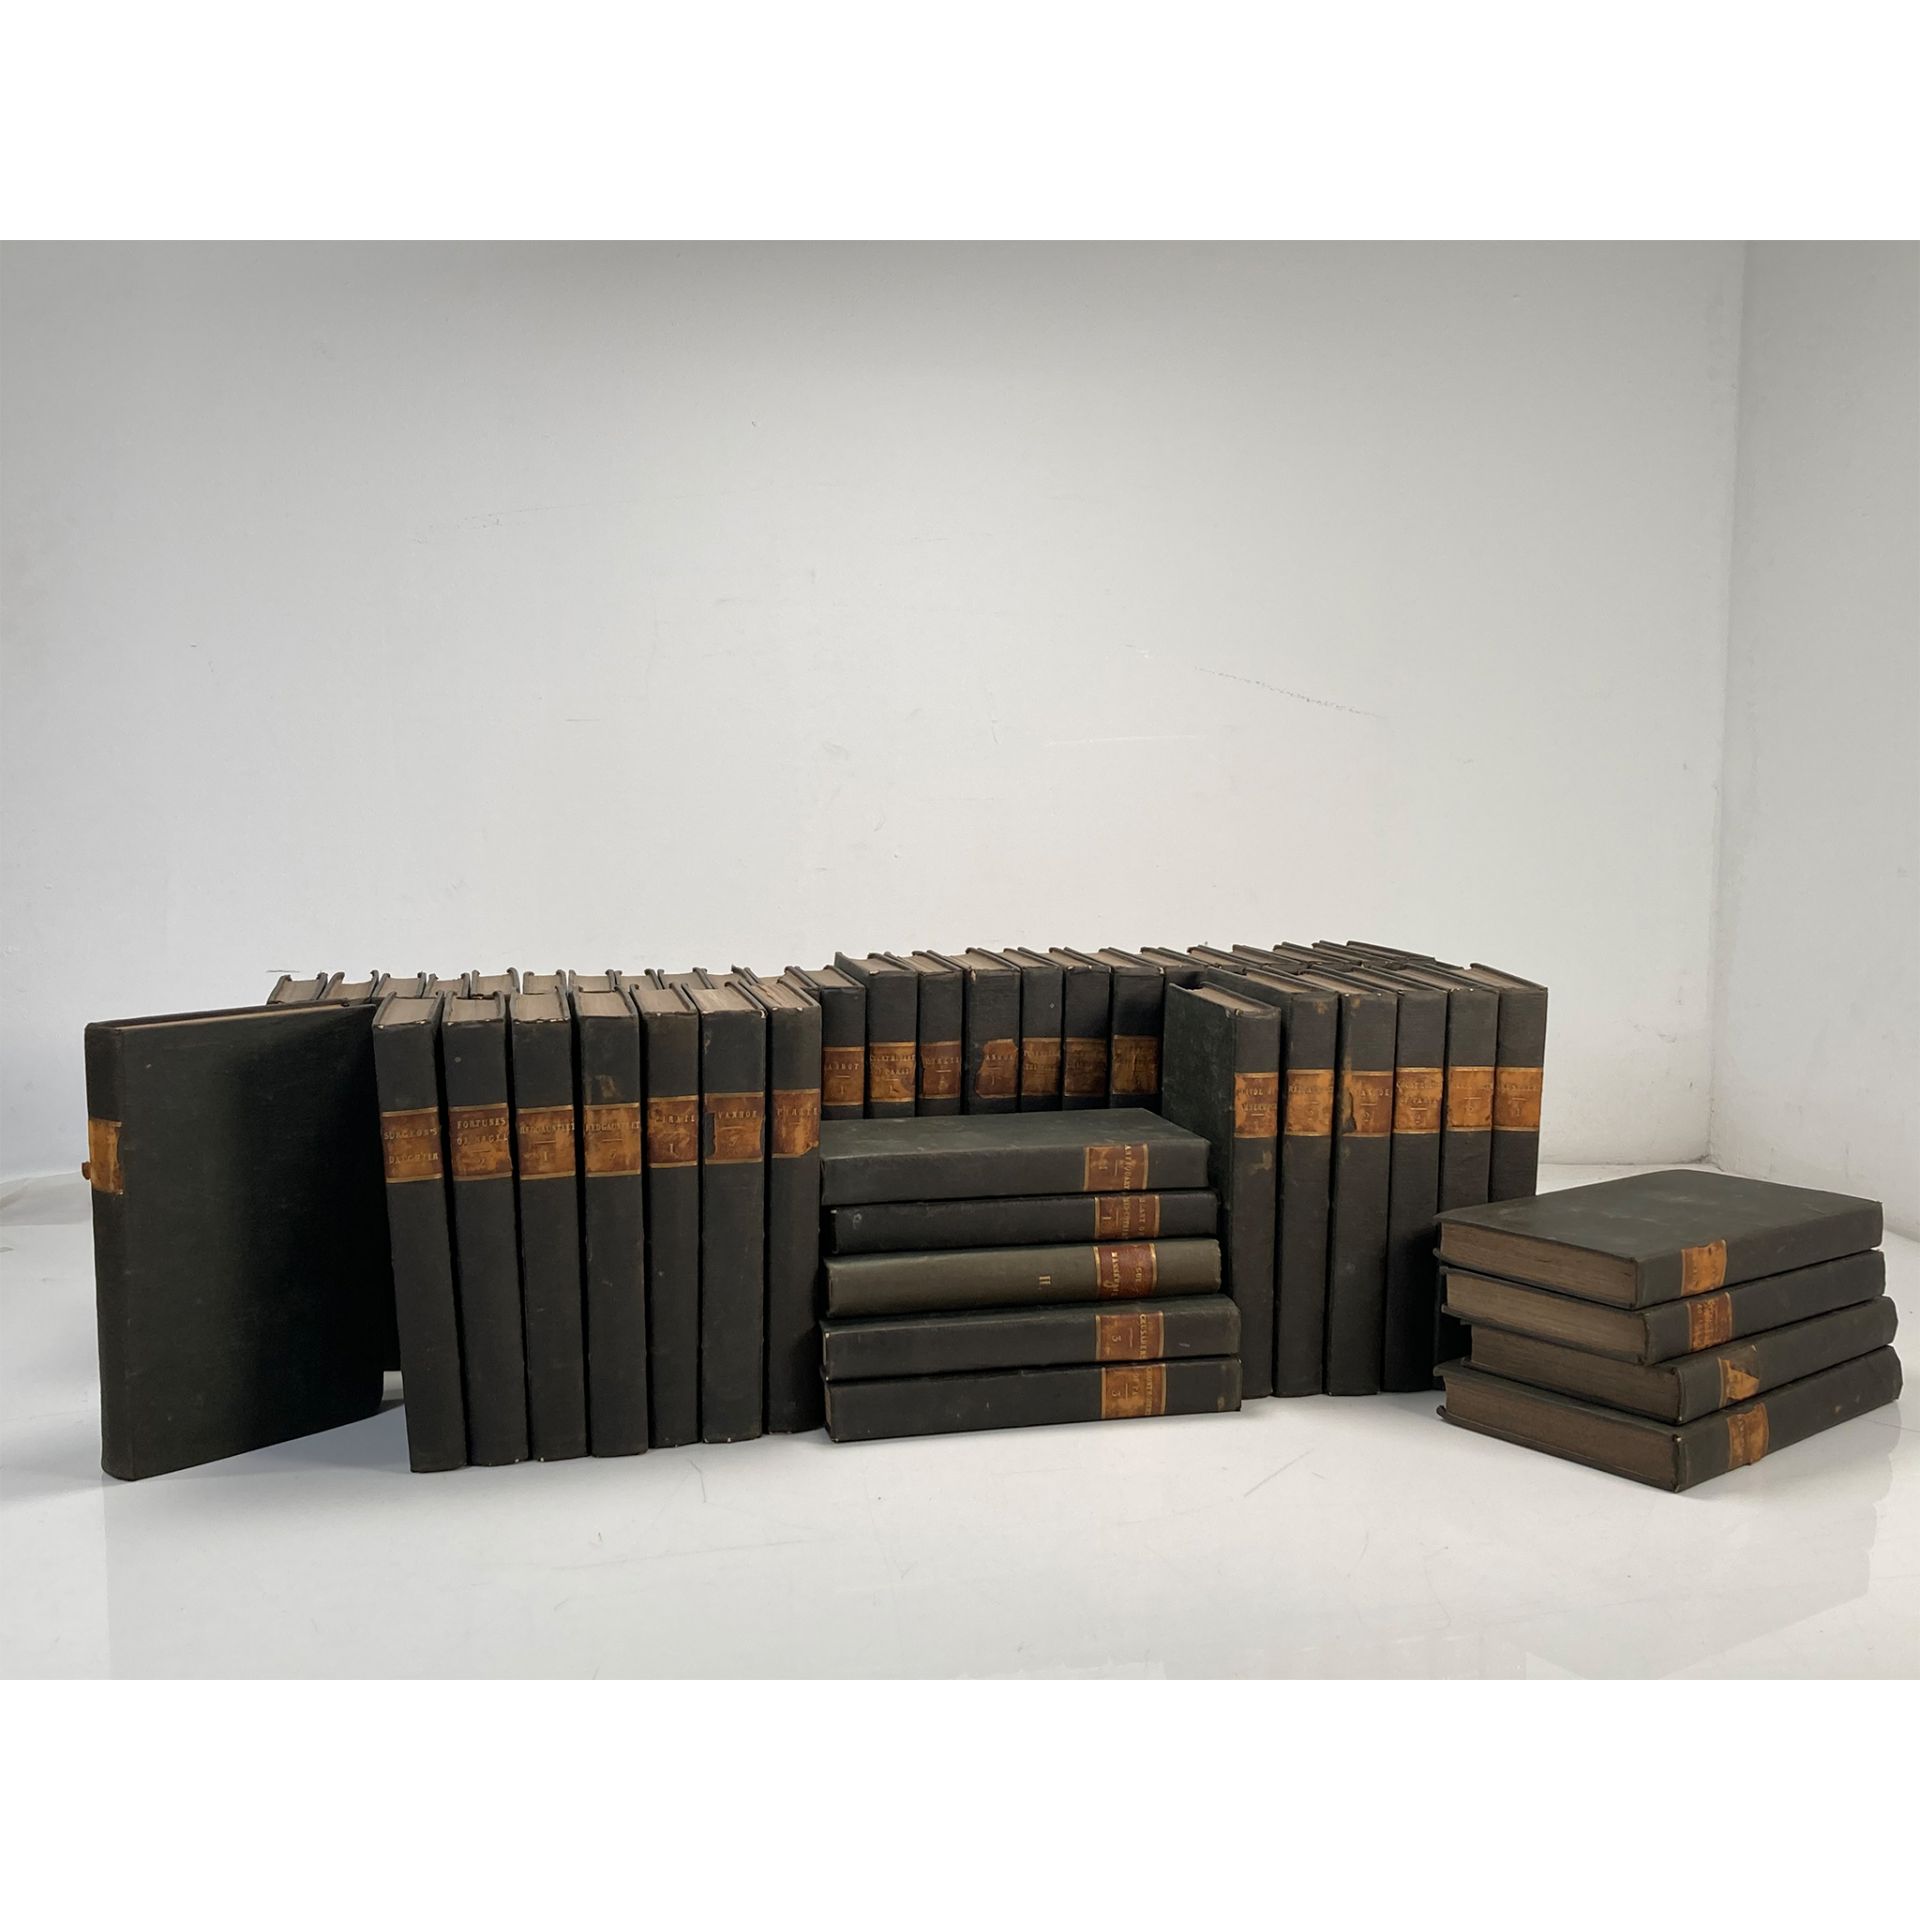 Scott, Sir Walter 19 First editions bound in cloth, comprising